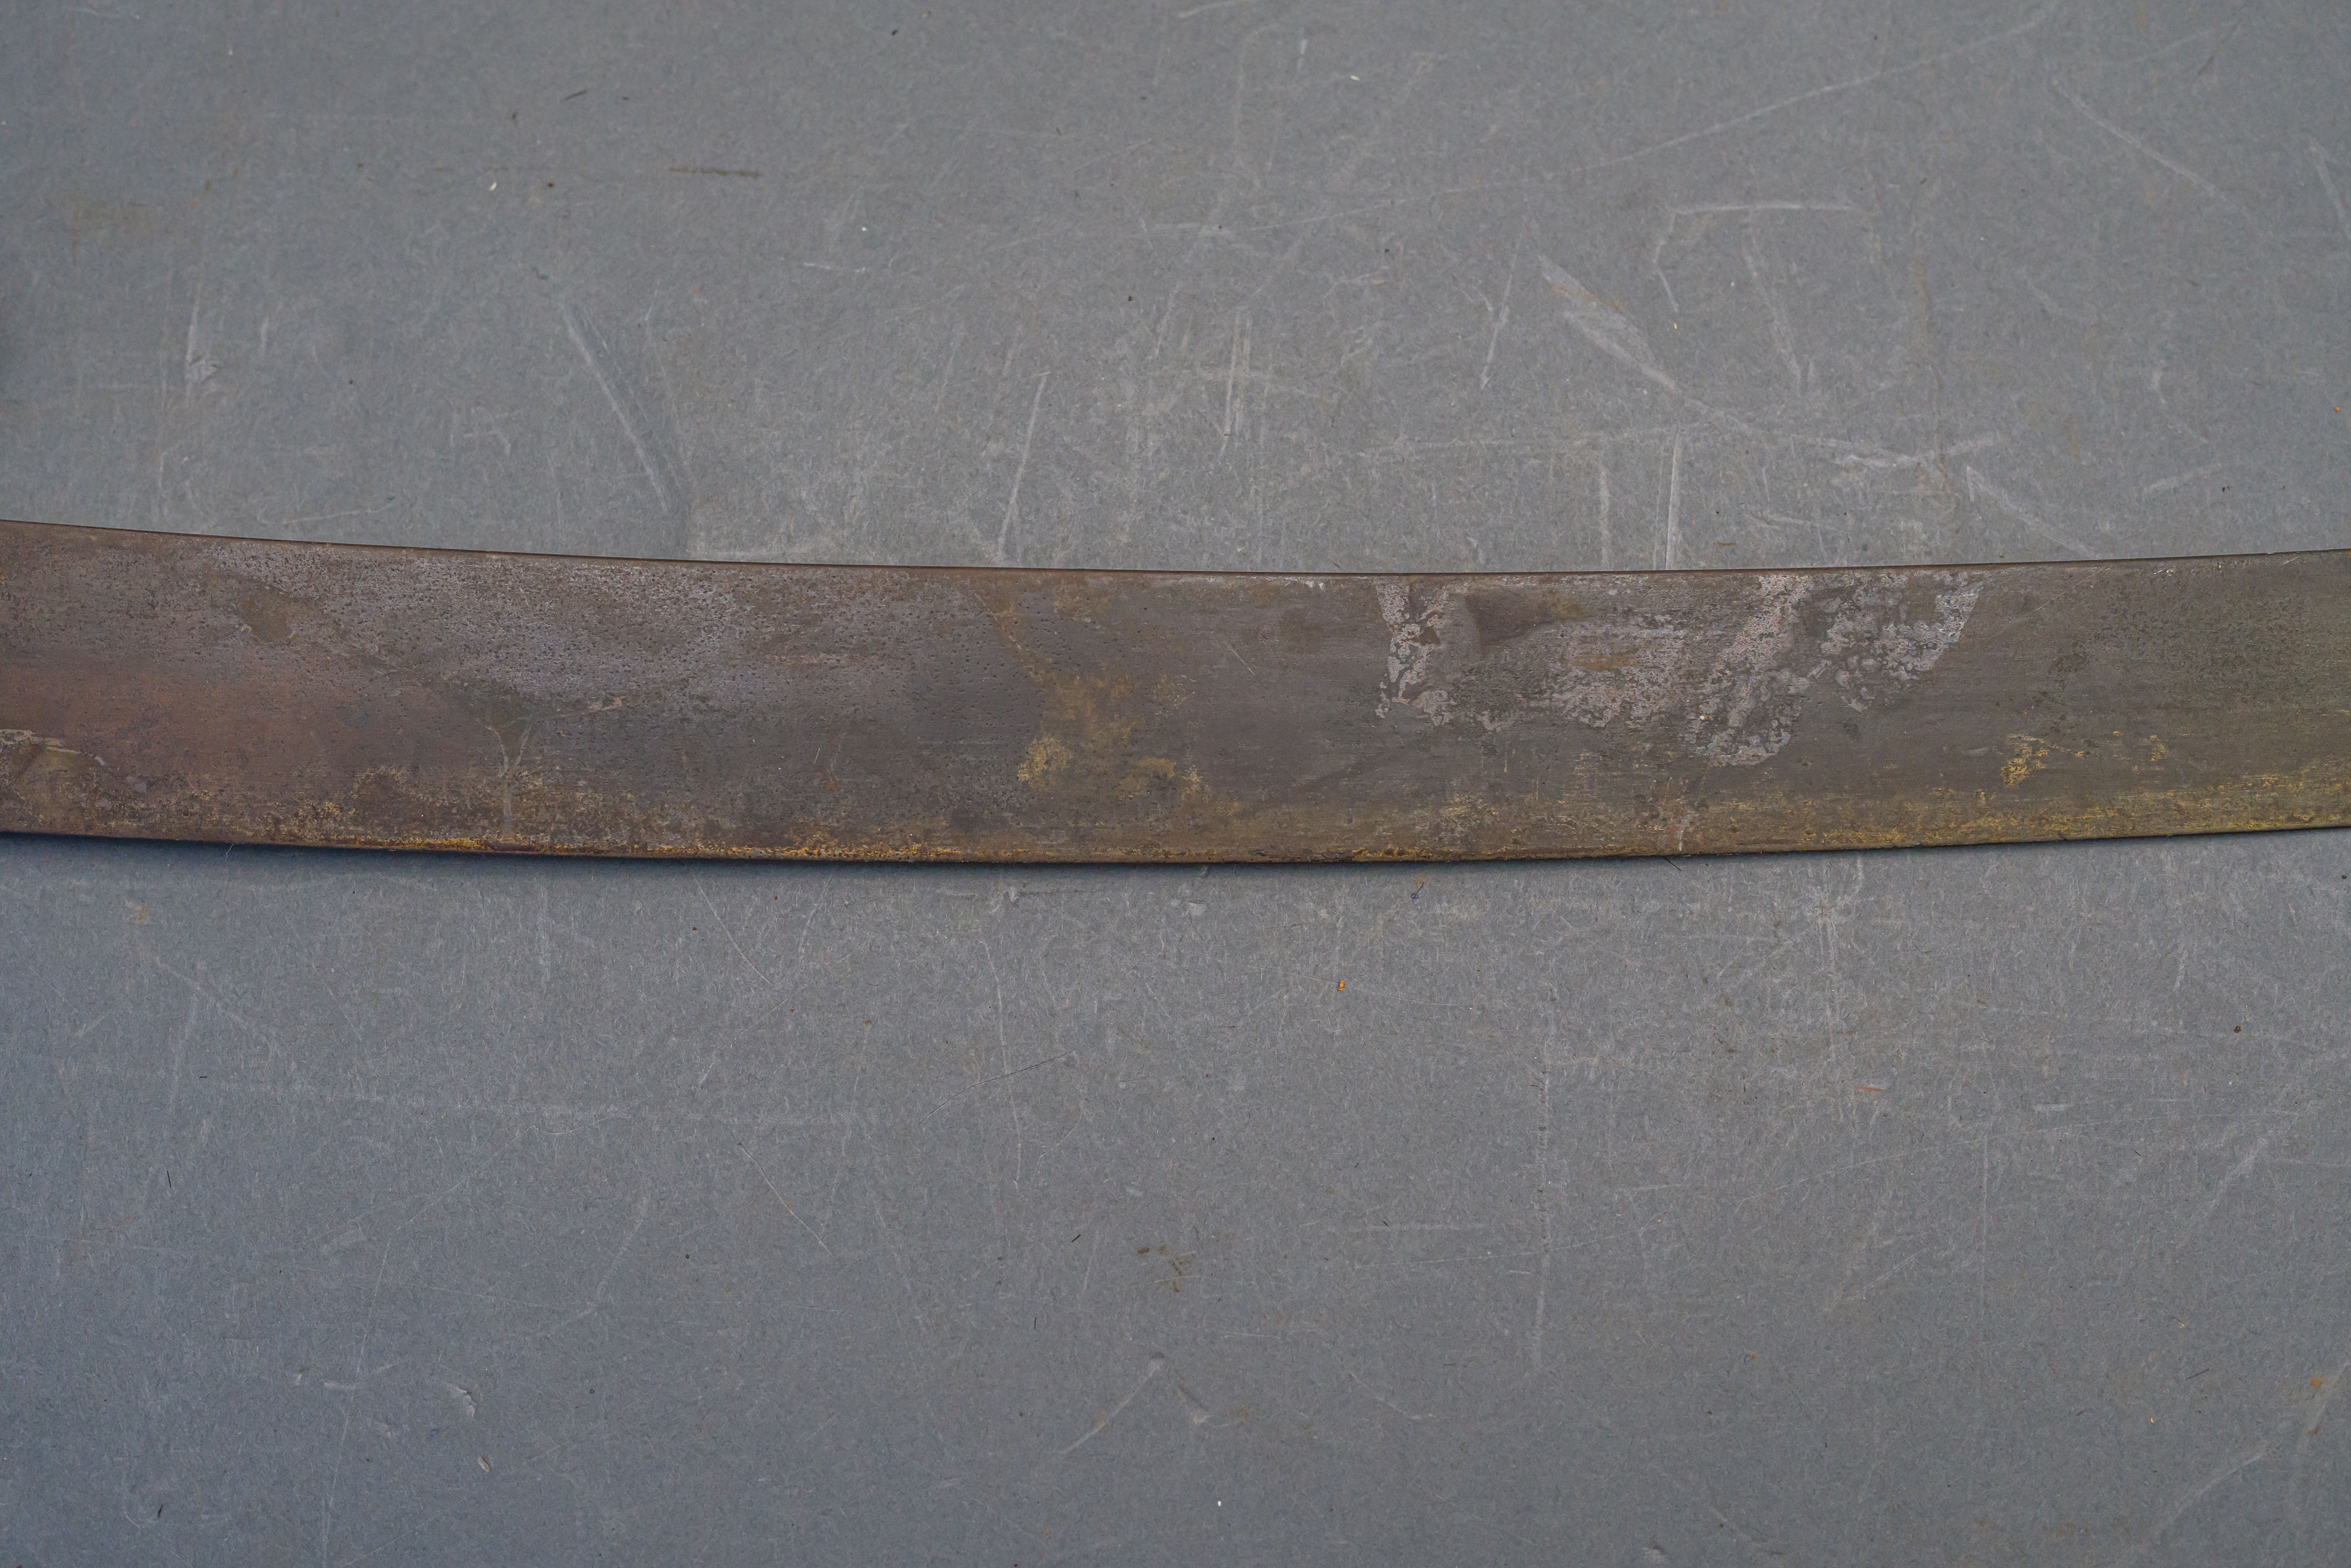 TWO AFRICAN AXES, A BOOMERANG AND A FRENCH MODEL 1816 INFANTRY SHORTSWORD (BRIQUET) - Image 3 of 23